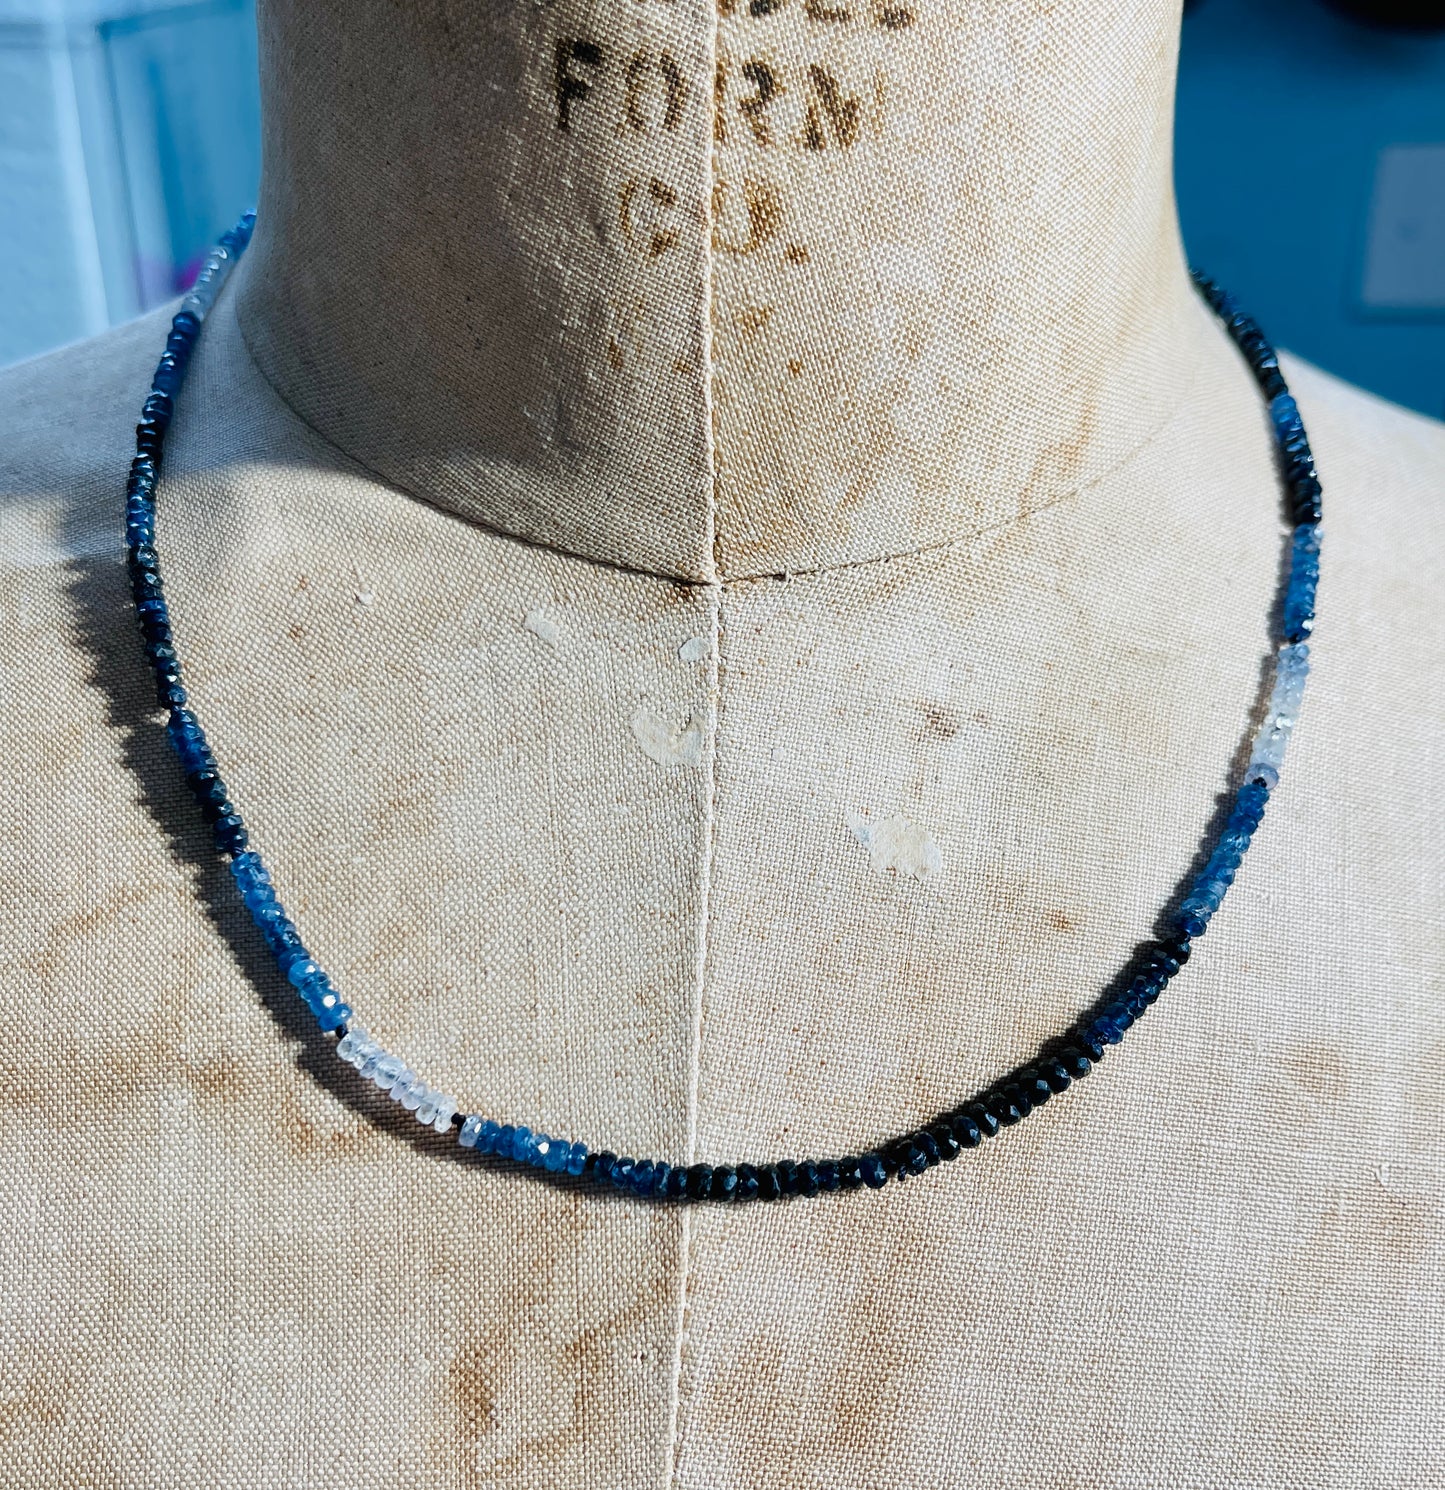 Ombre Blue Sapphire Hand Knotted Necklace